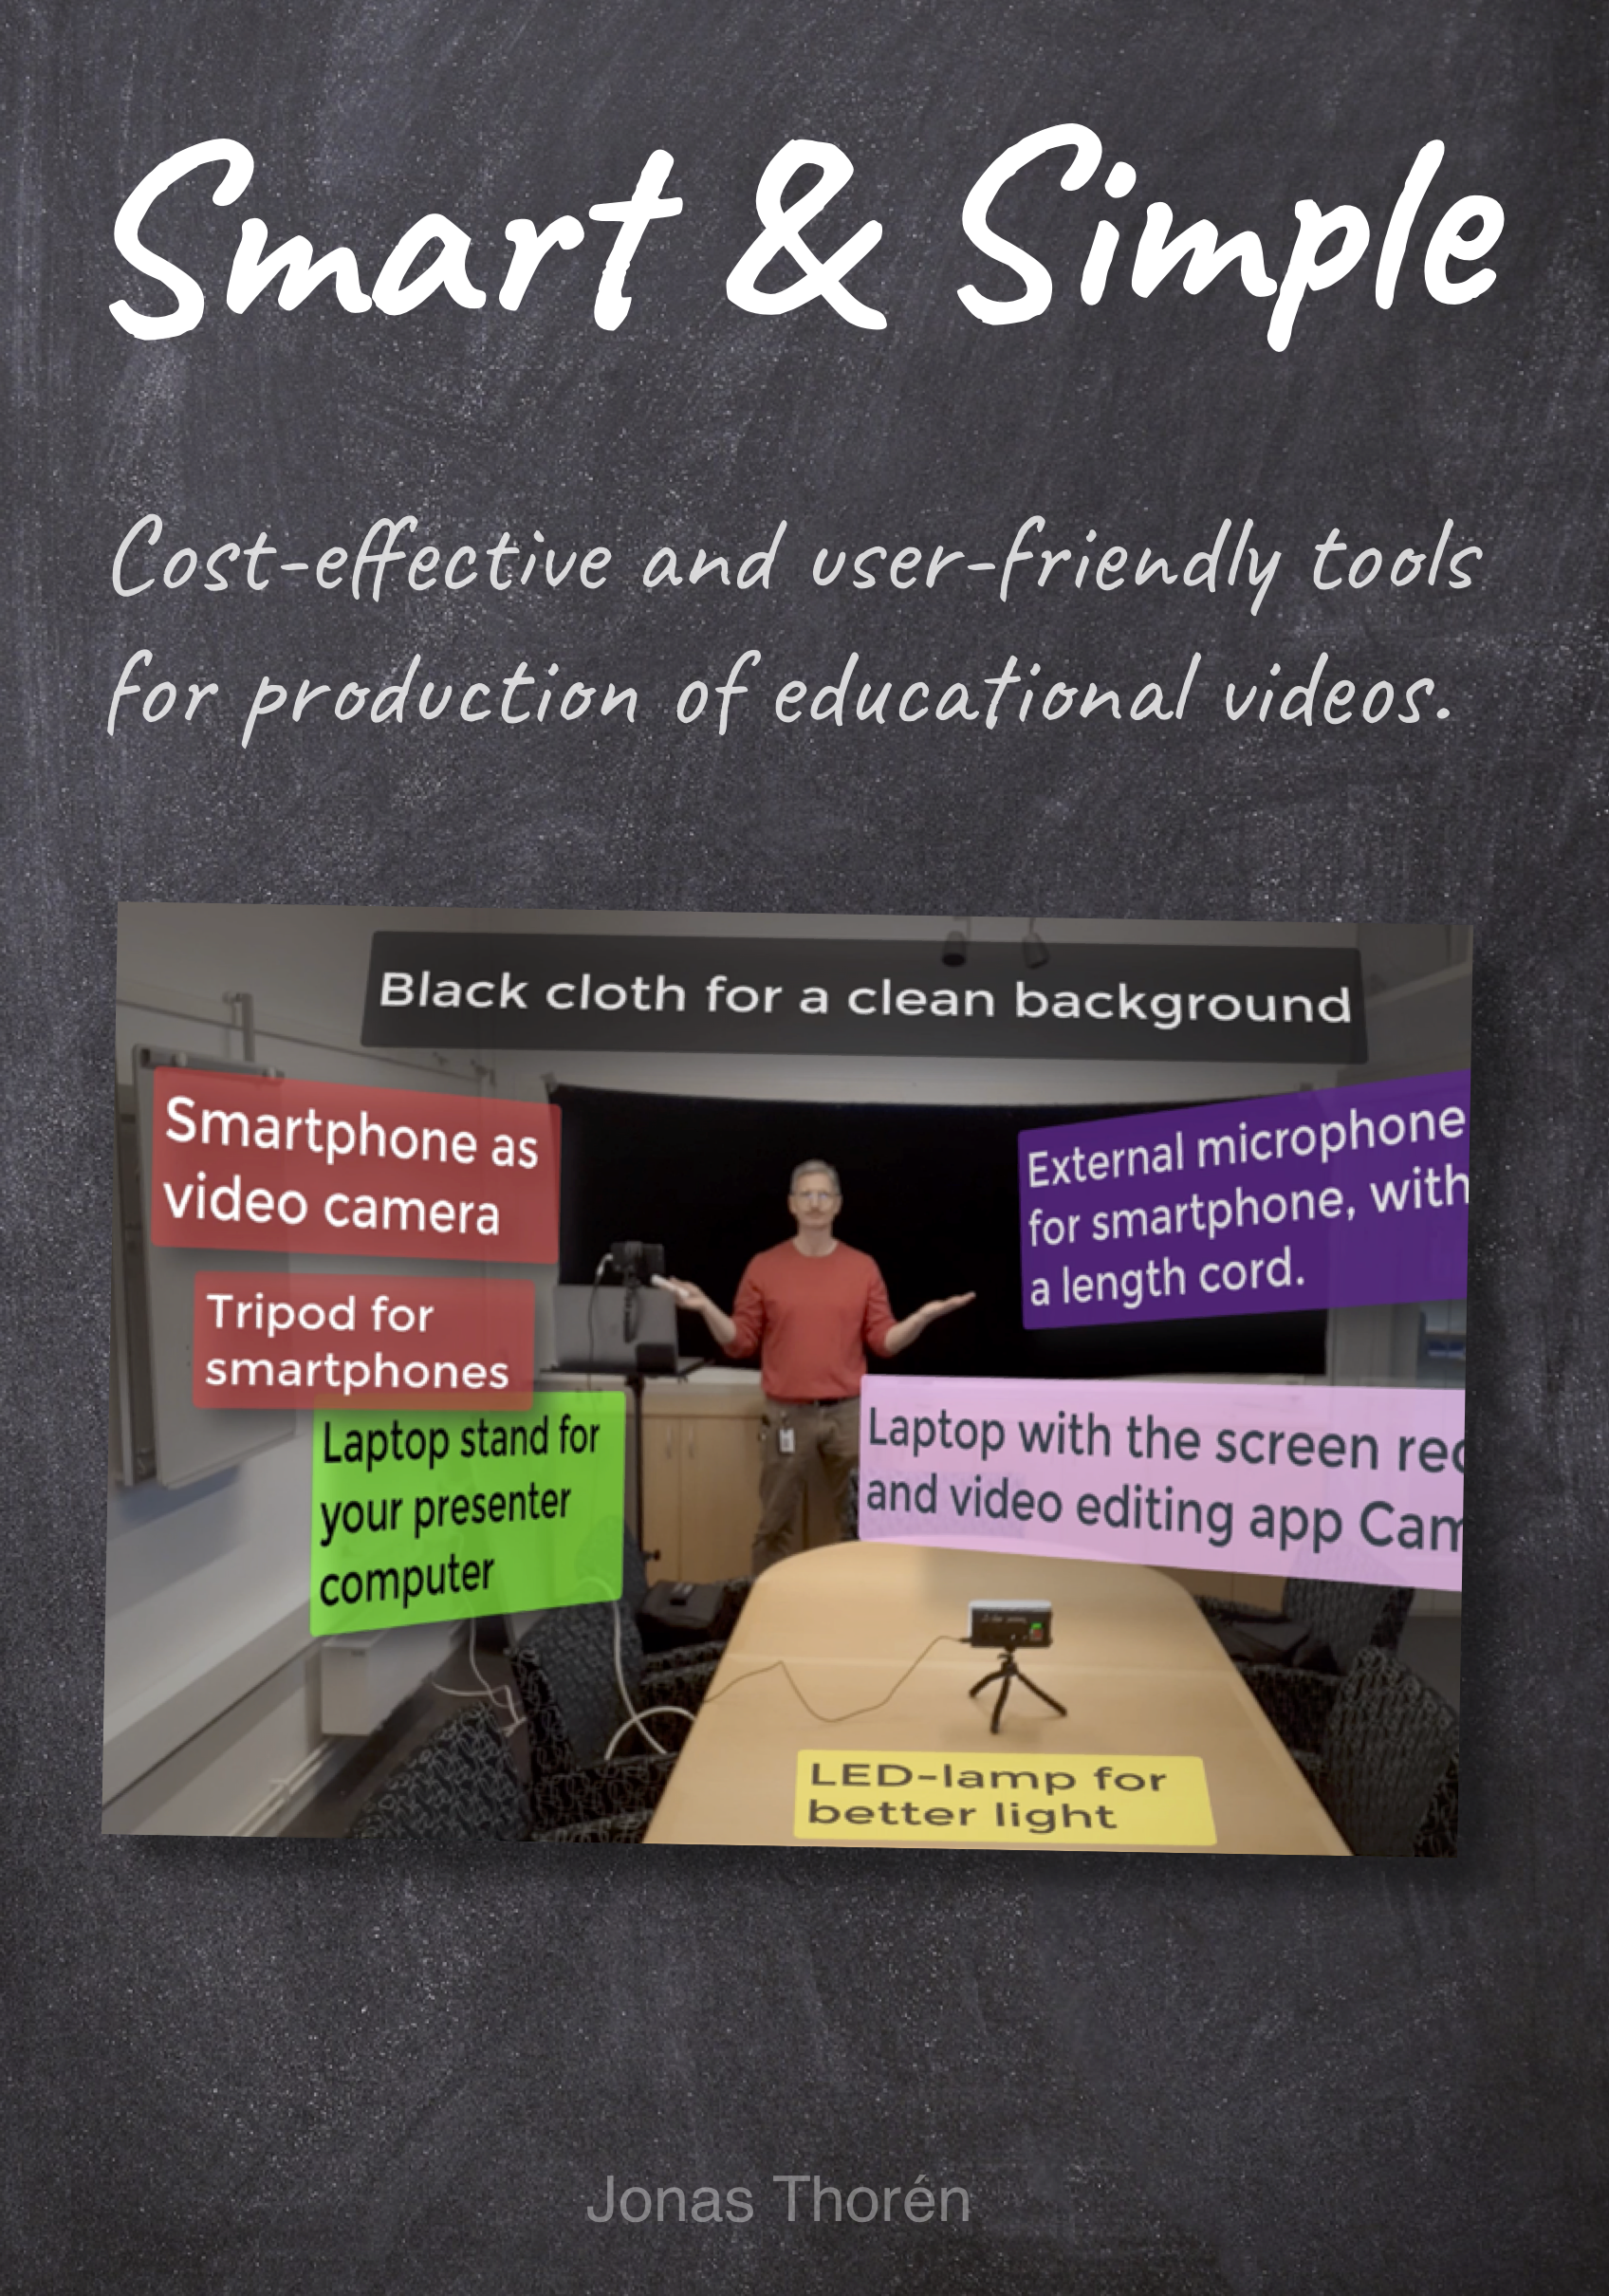 smart and simple - cost-effective and user-friendly tools for production of educational videos copy.png